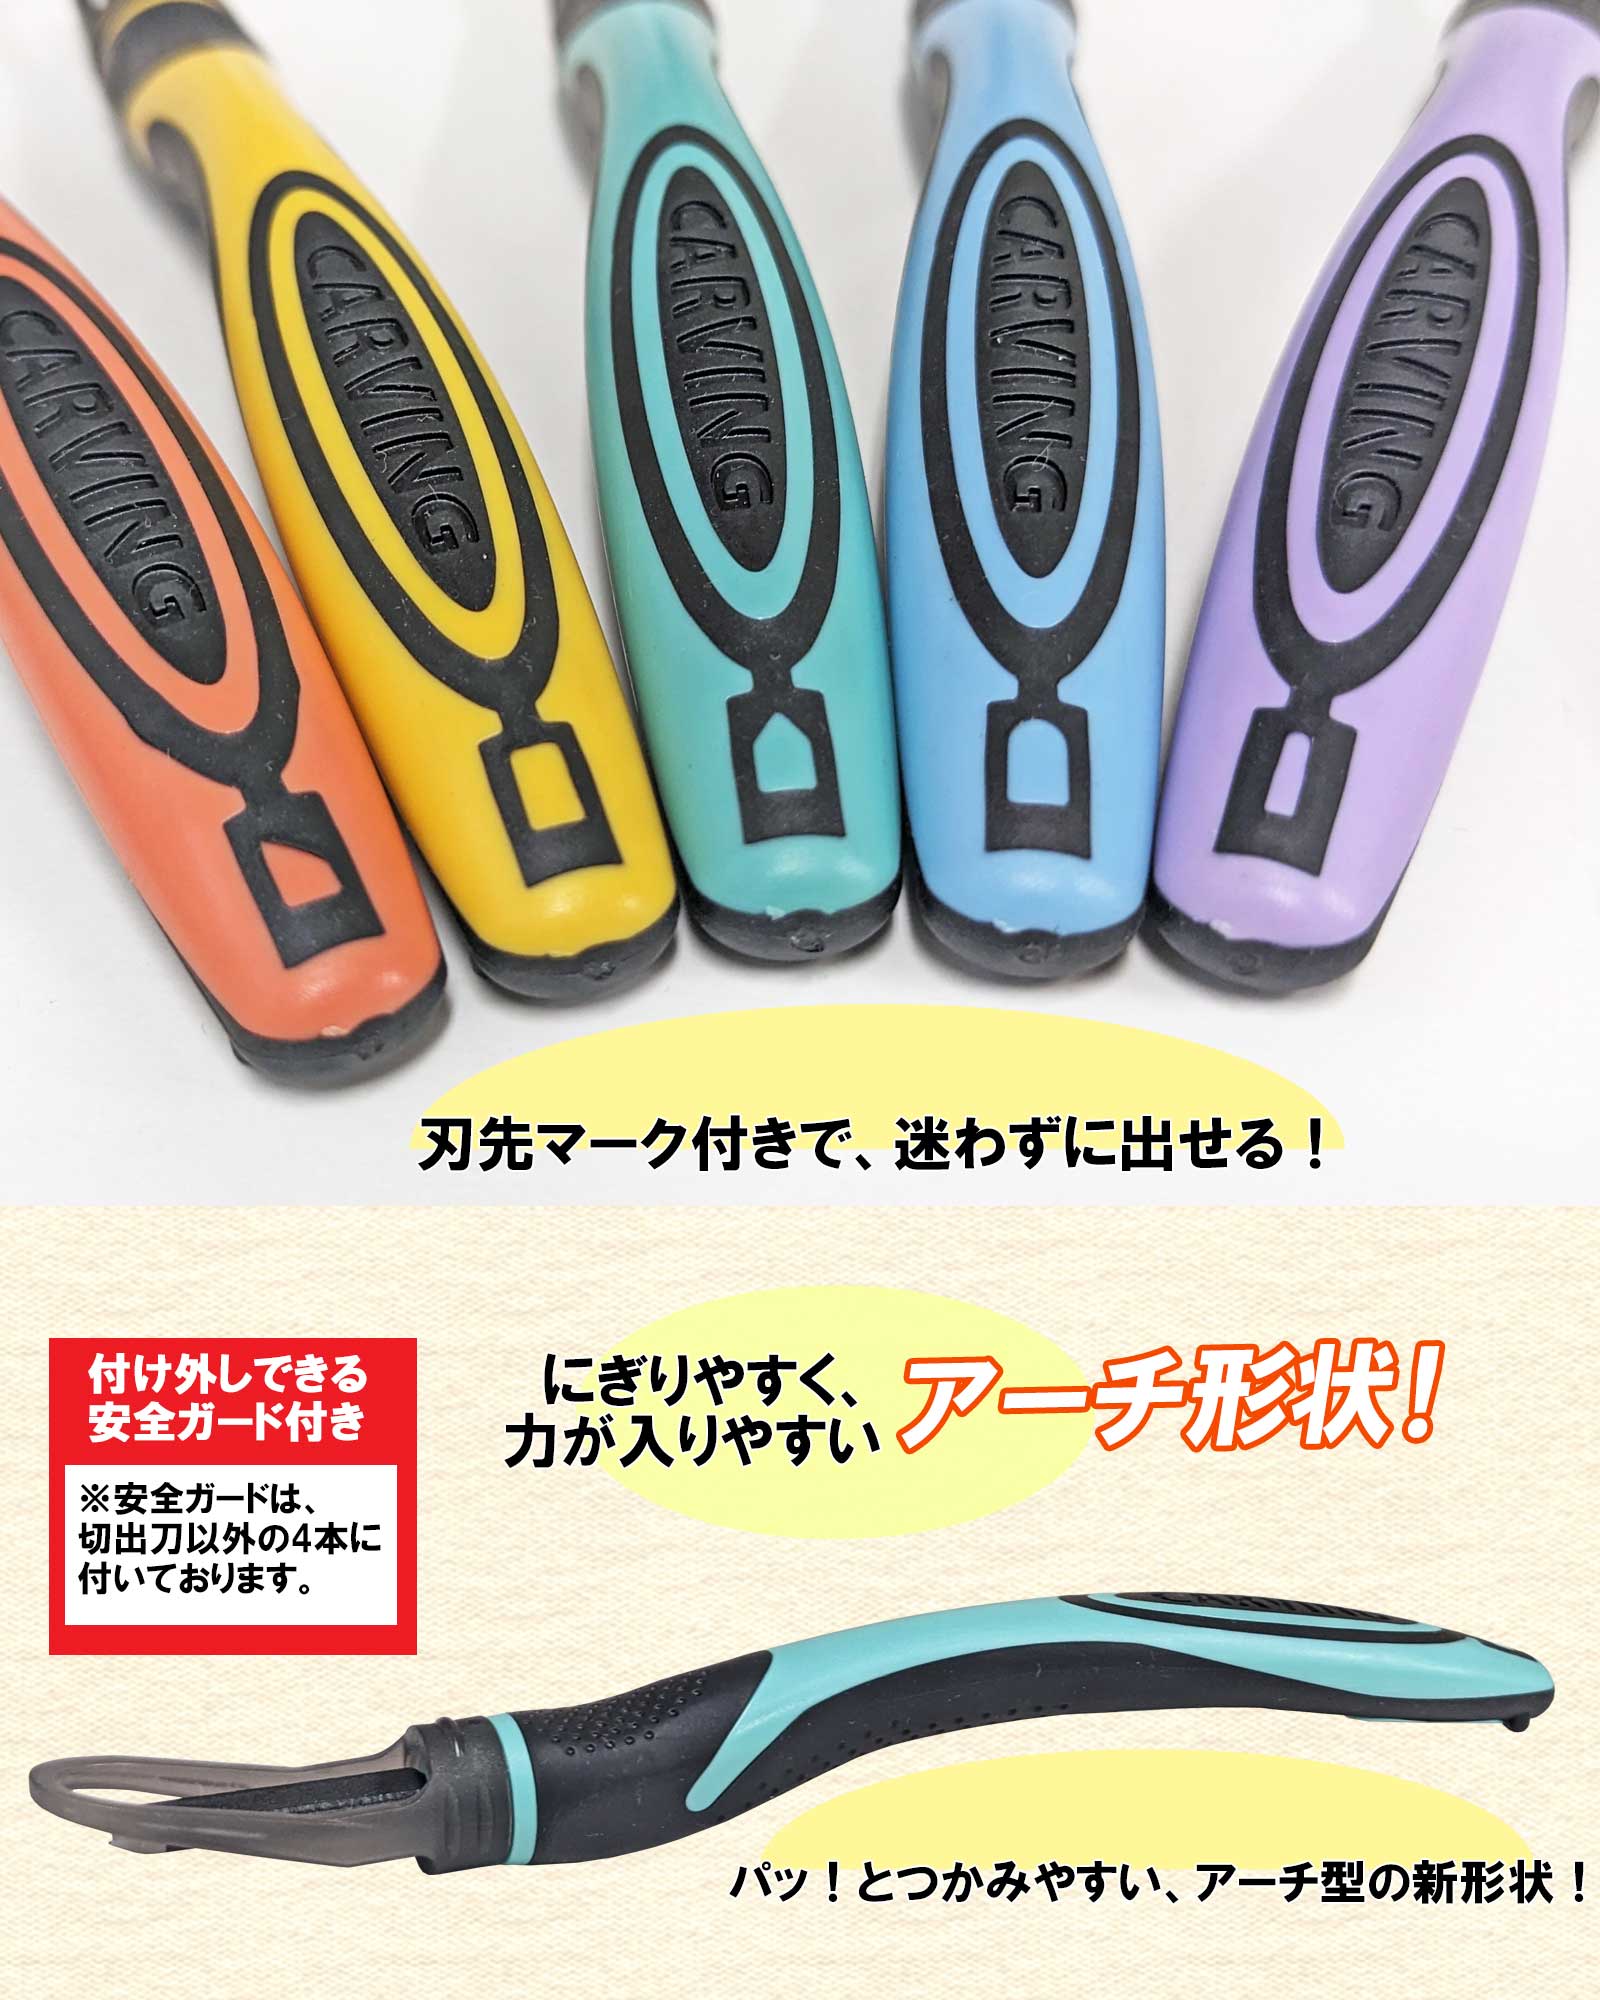  carving knife set hyper player 2WAY GRIP carving knife safety guard attaching . spring cutlery .. is . elementary school 